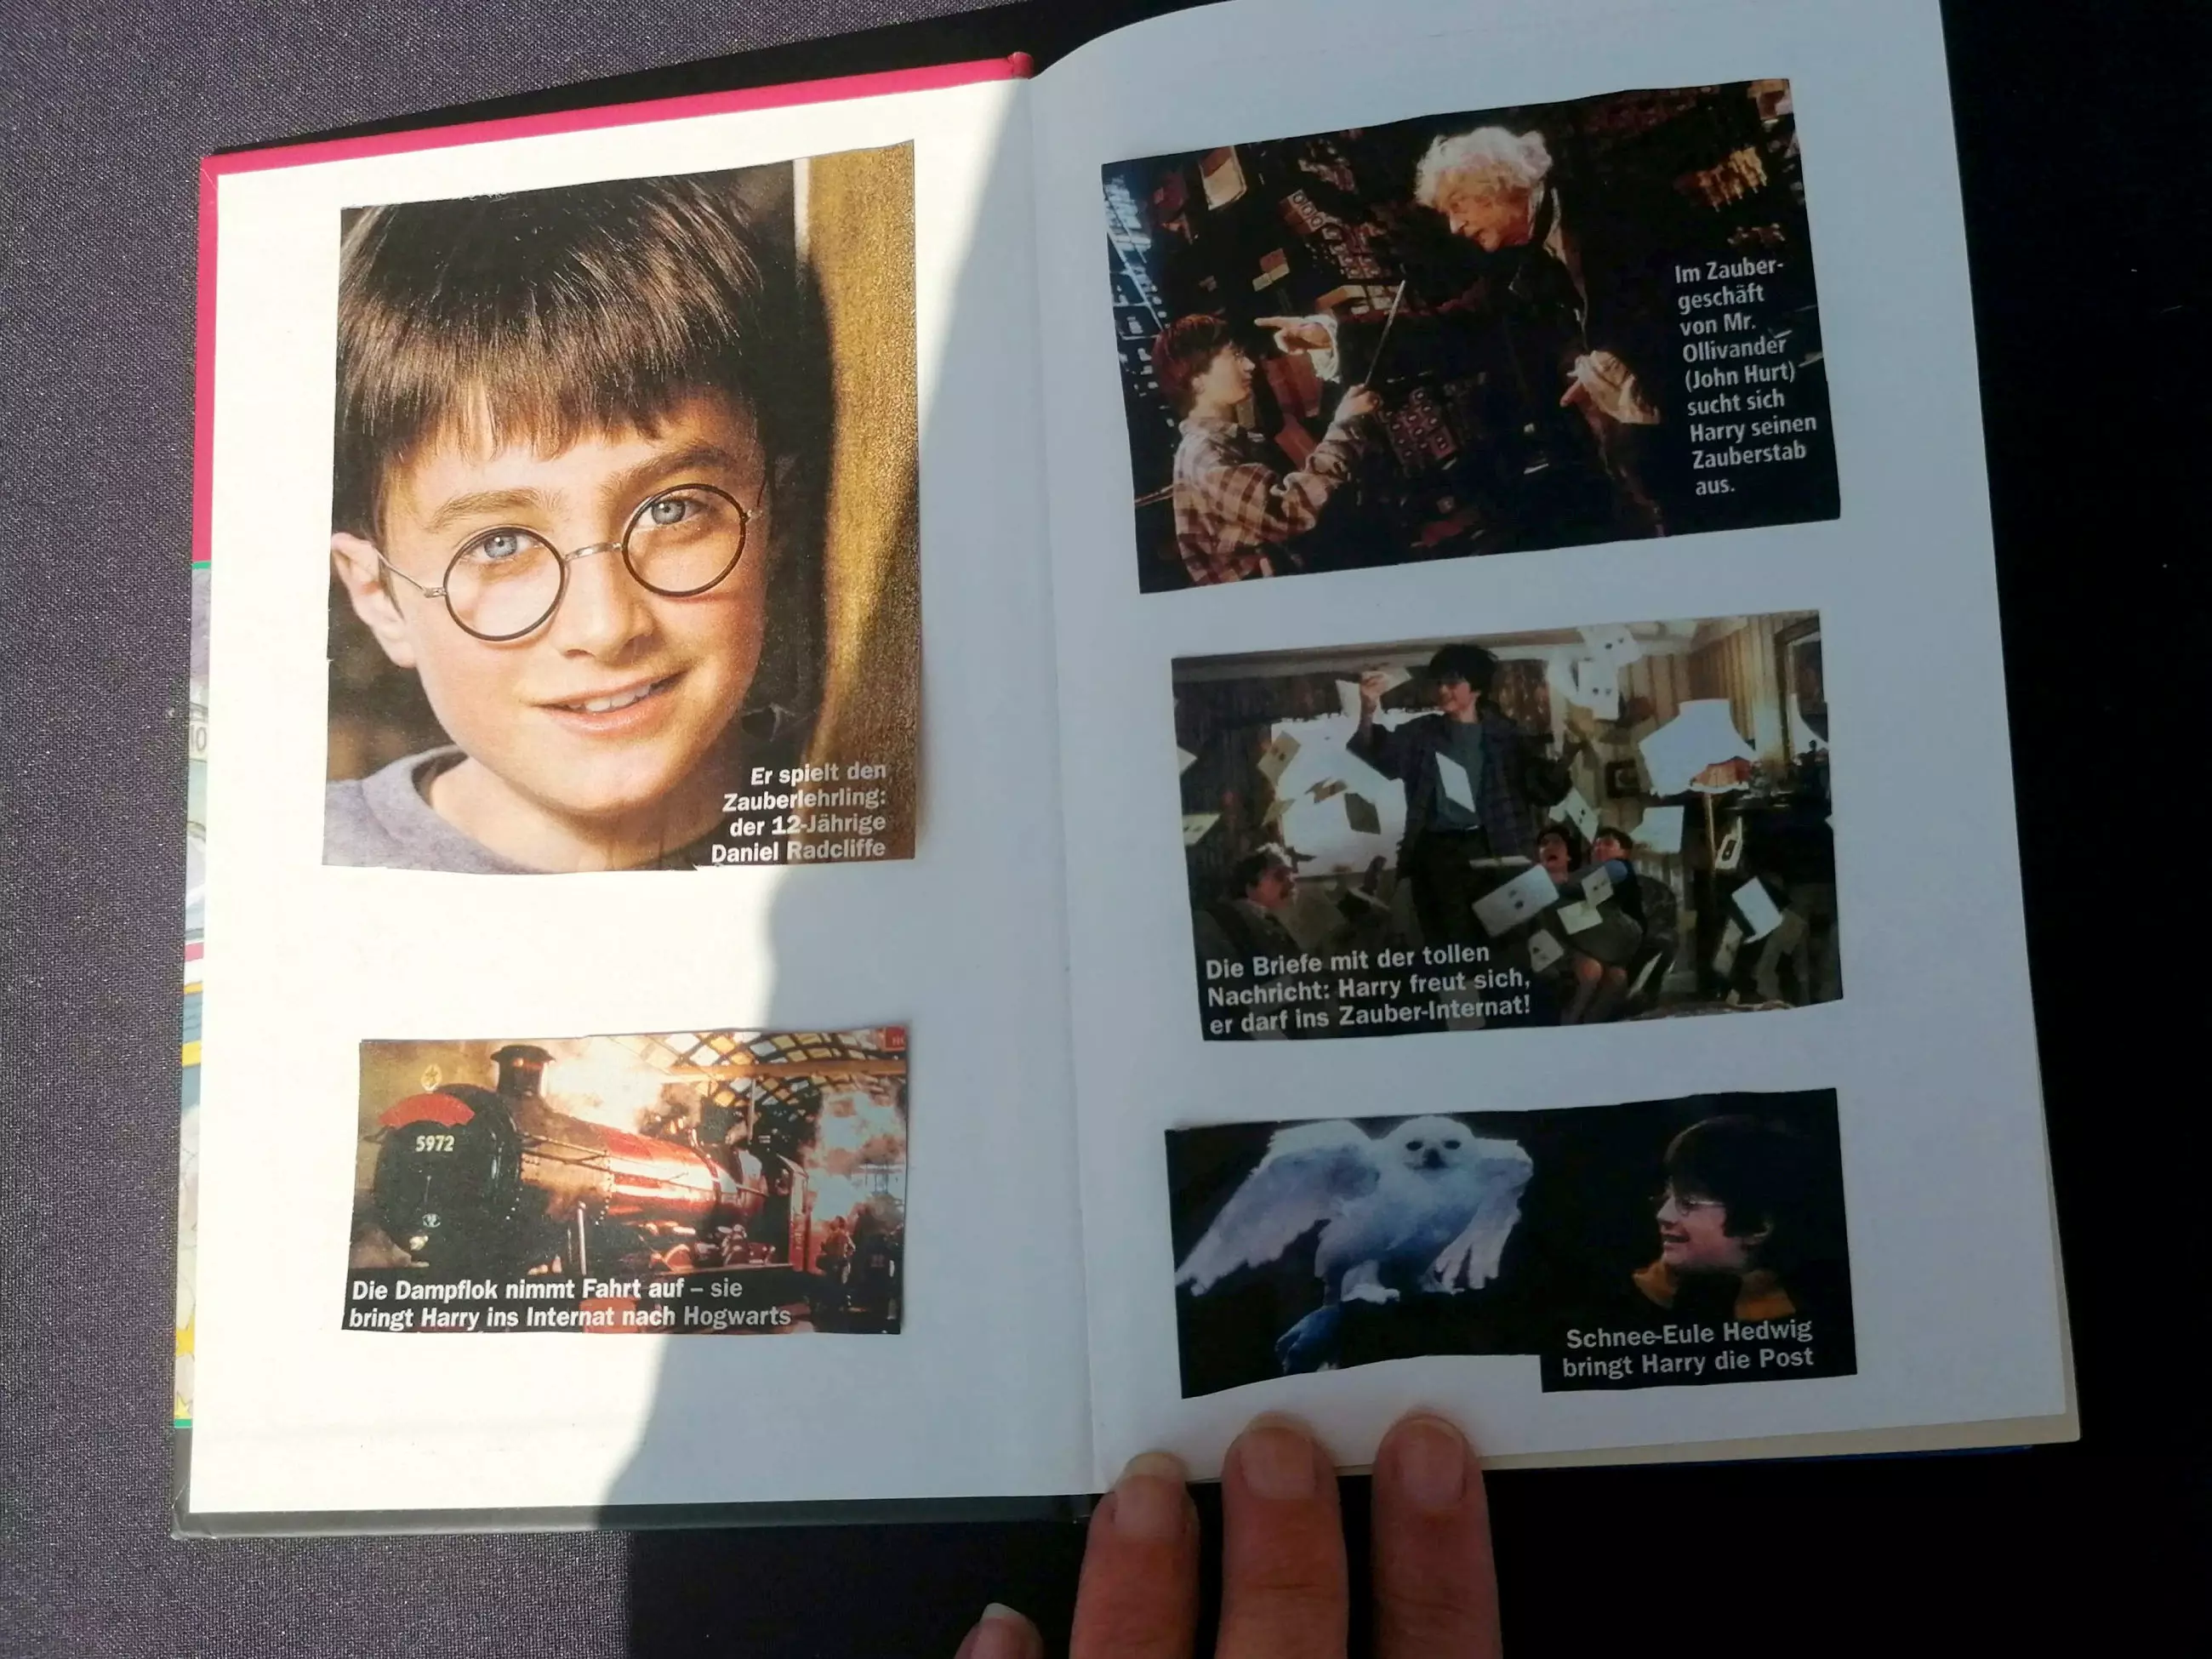 One of the children stuck pictures from the Harry Potter films into the book.